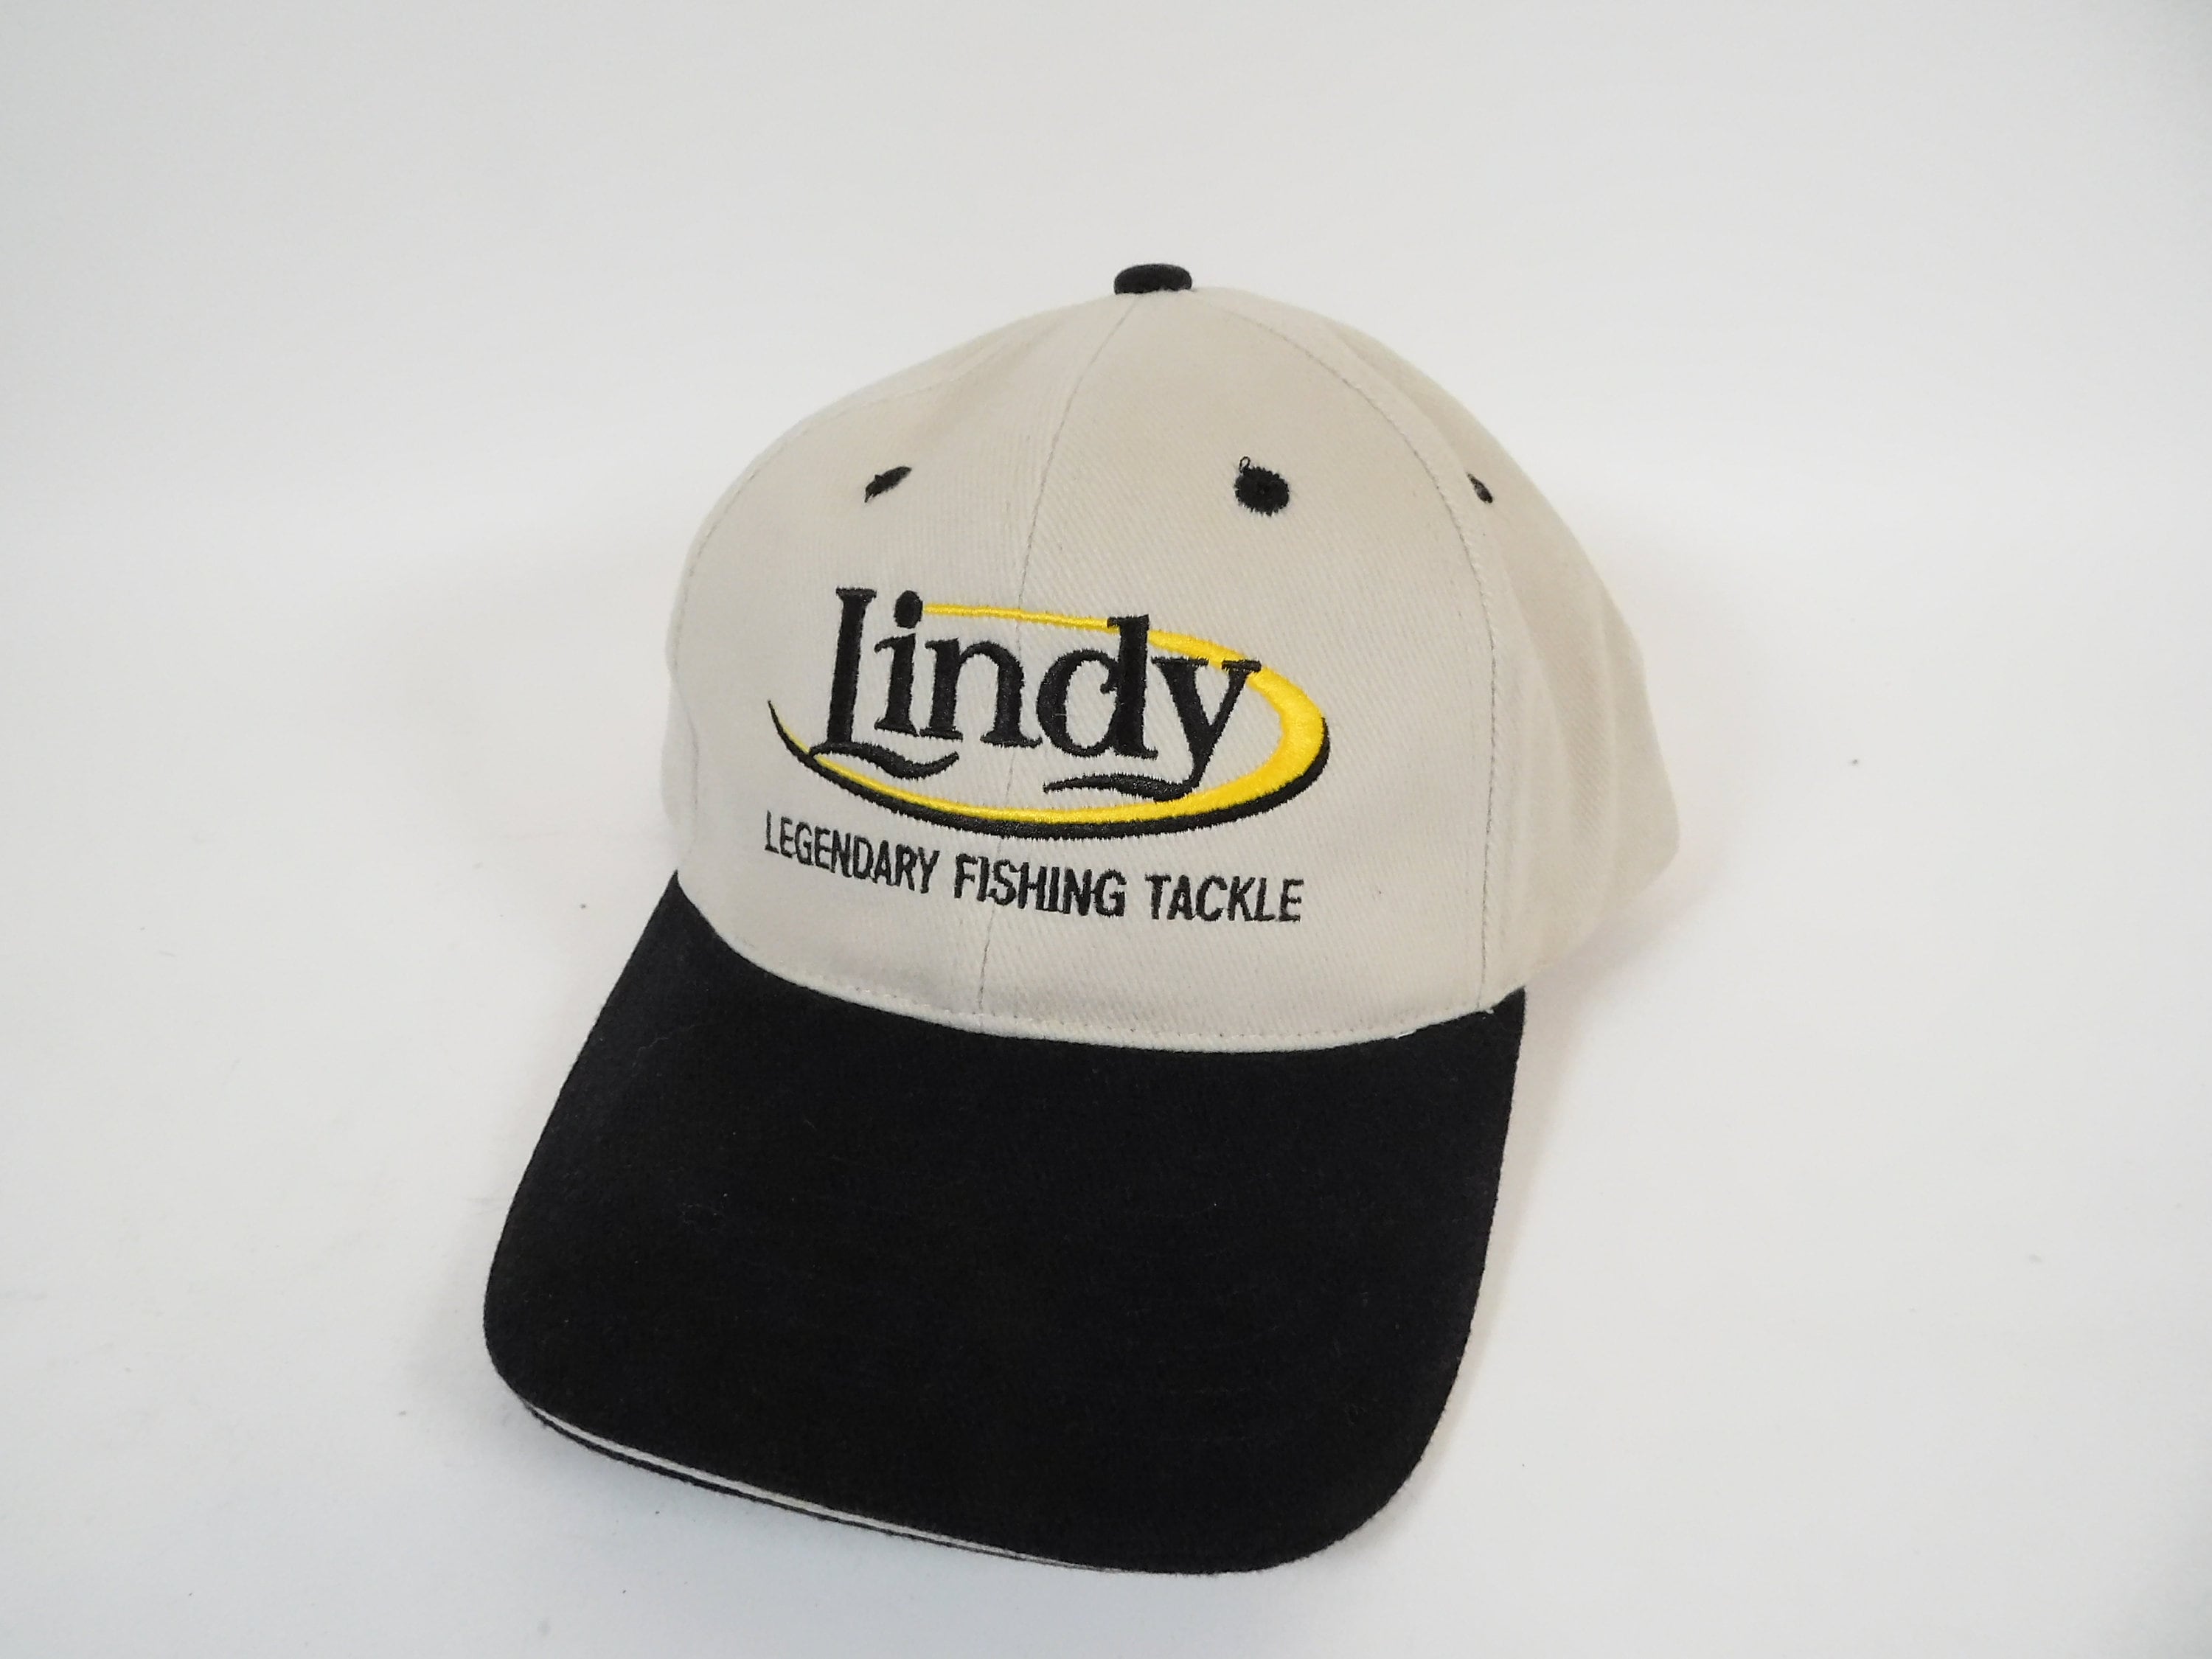 Lindy Legendary Fishing Tackle Hat 0620 